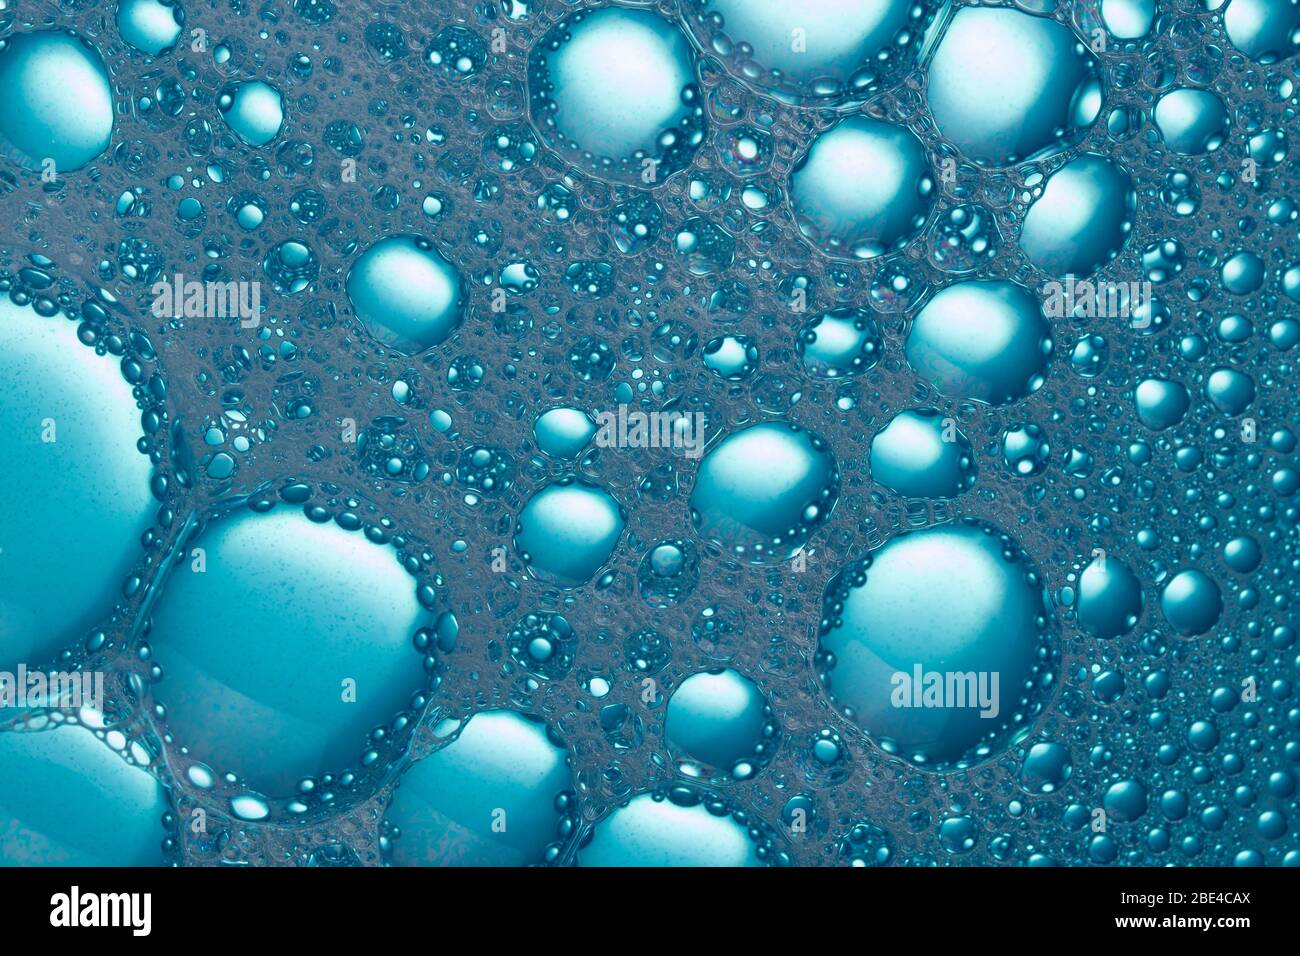 Sky Blue Acrylic Paint Background Foam Surface Stock Photo - Image of soap,  abstract: 151386148